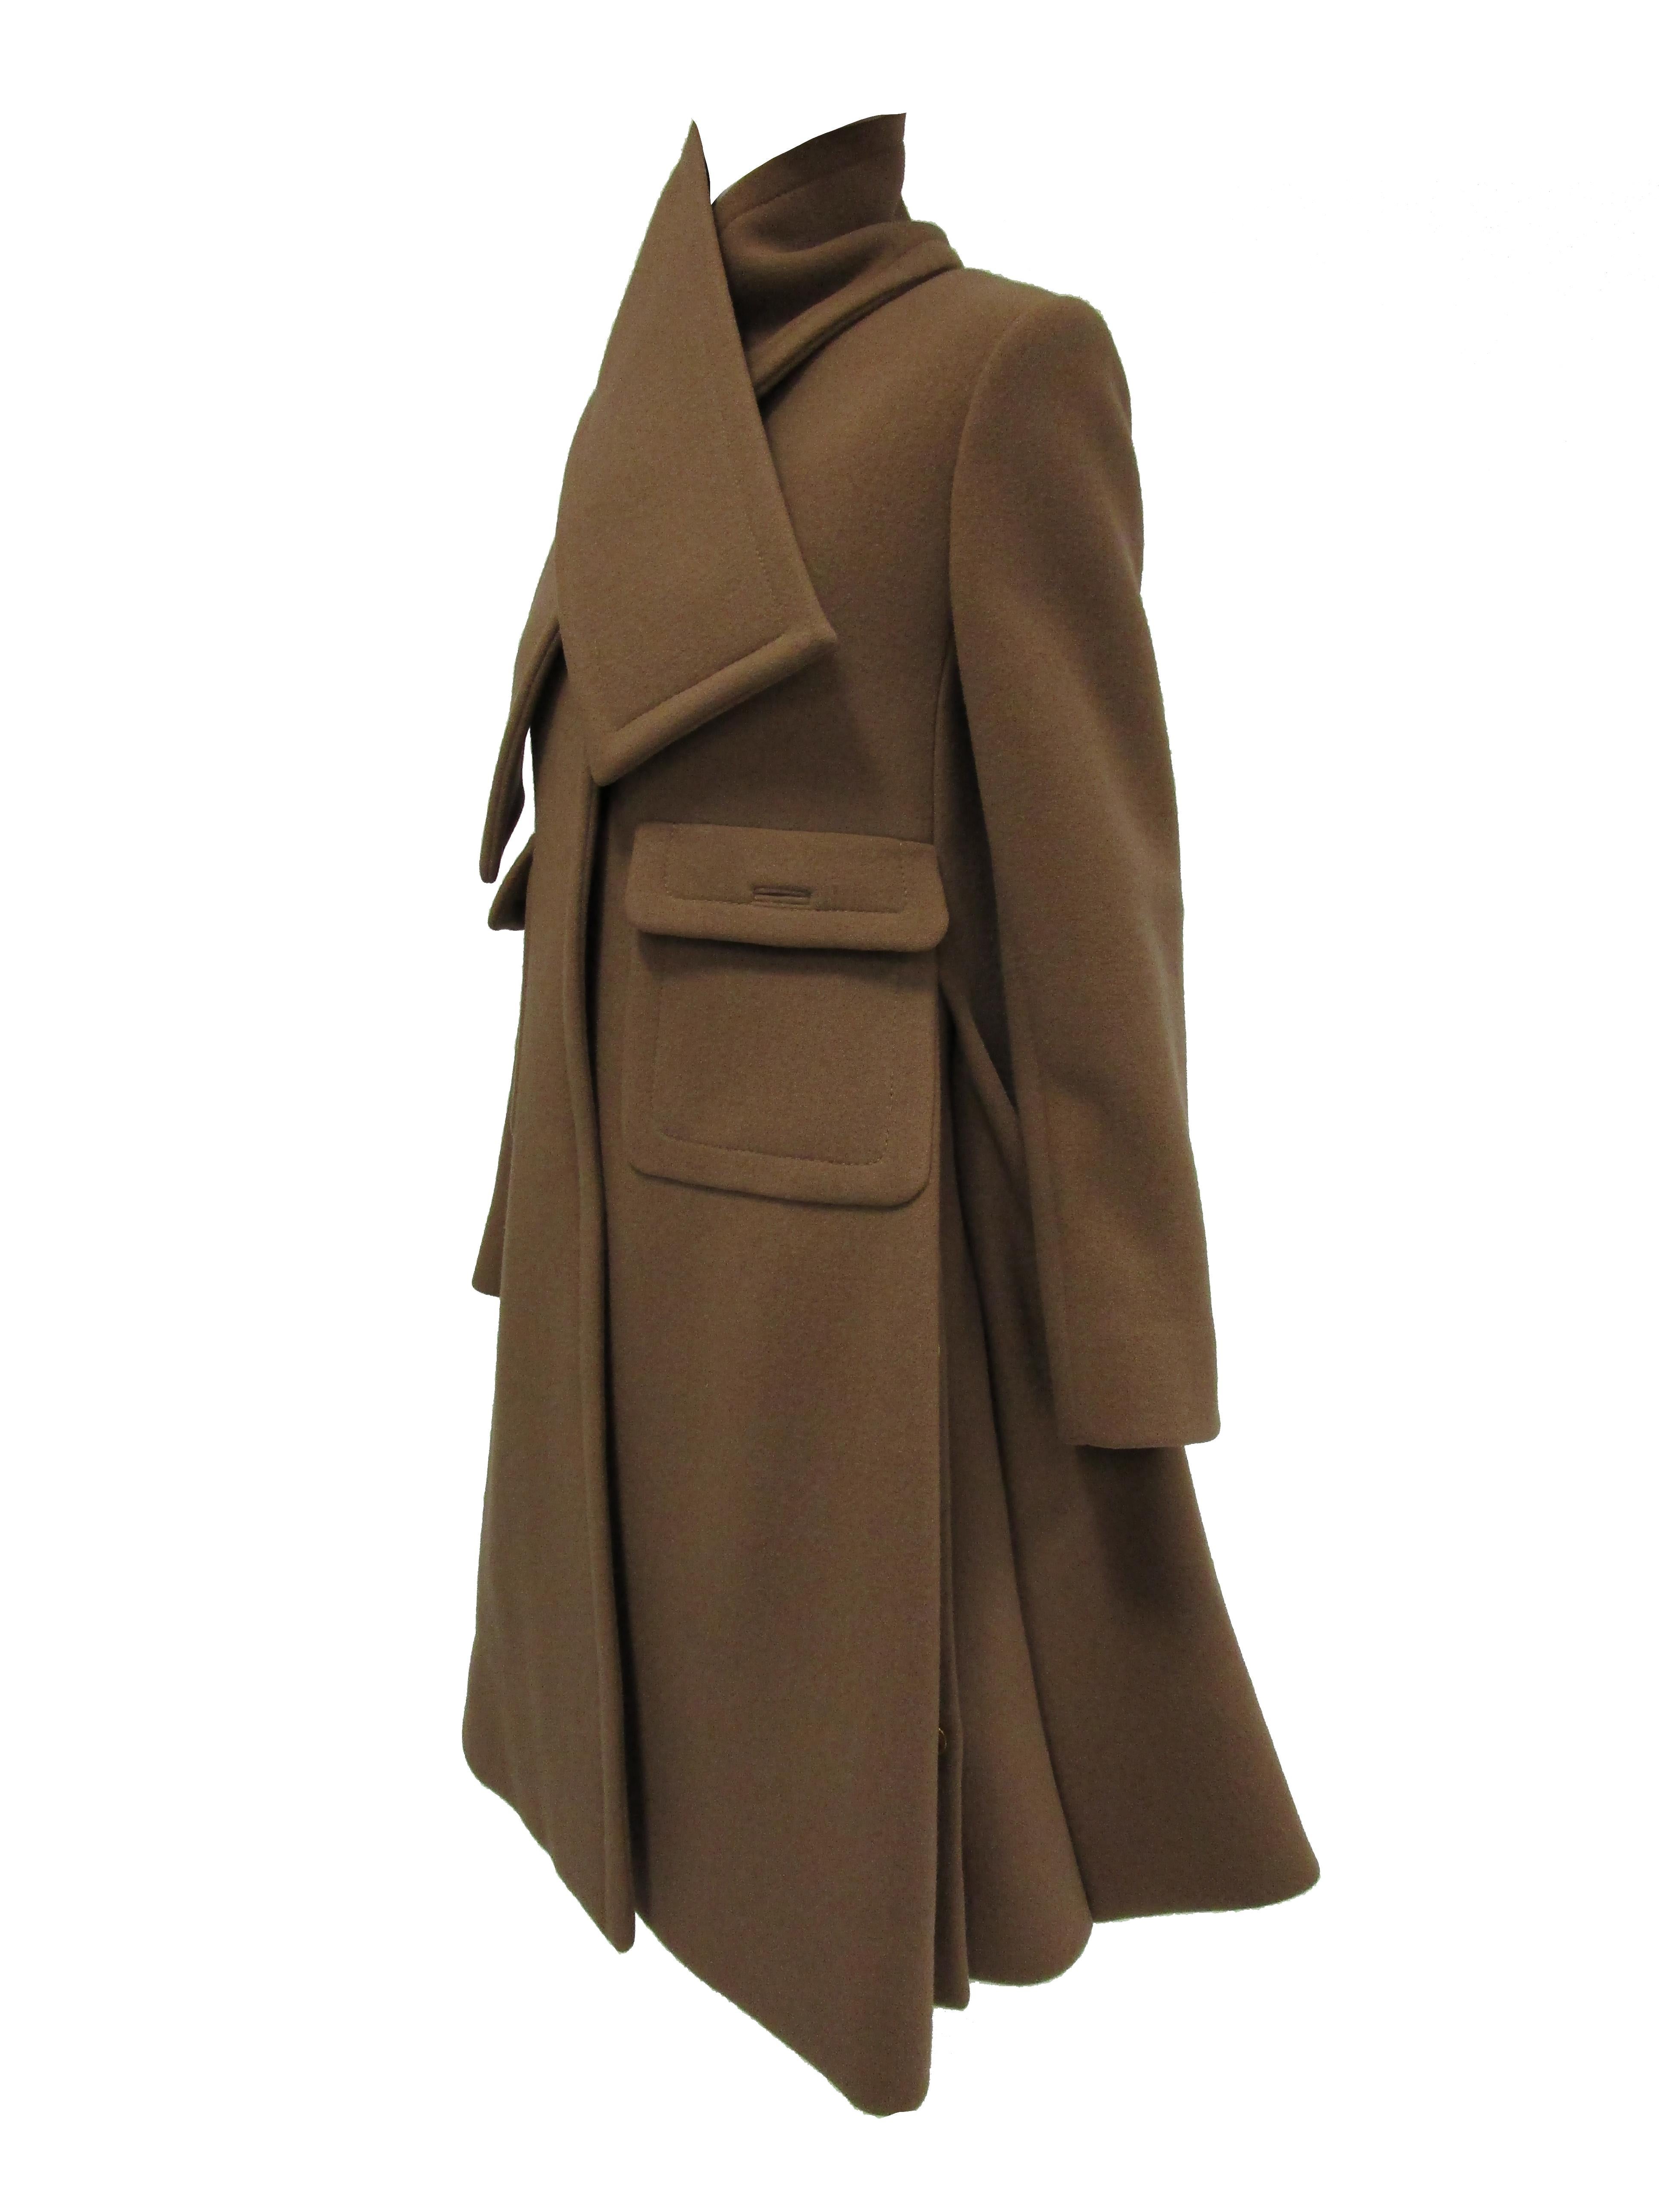 Gorgeous soft brown wool coat by Galanos. The coat hits just above the knee, has long sleeves, gently sloping shoulders, and a shallow V - neckline. The coat features two large pockets in front with flap and button closure. The coat has three